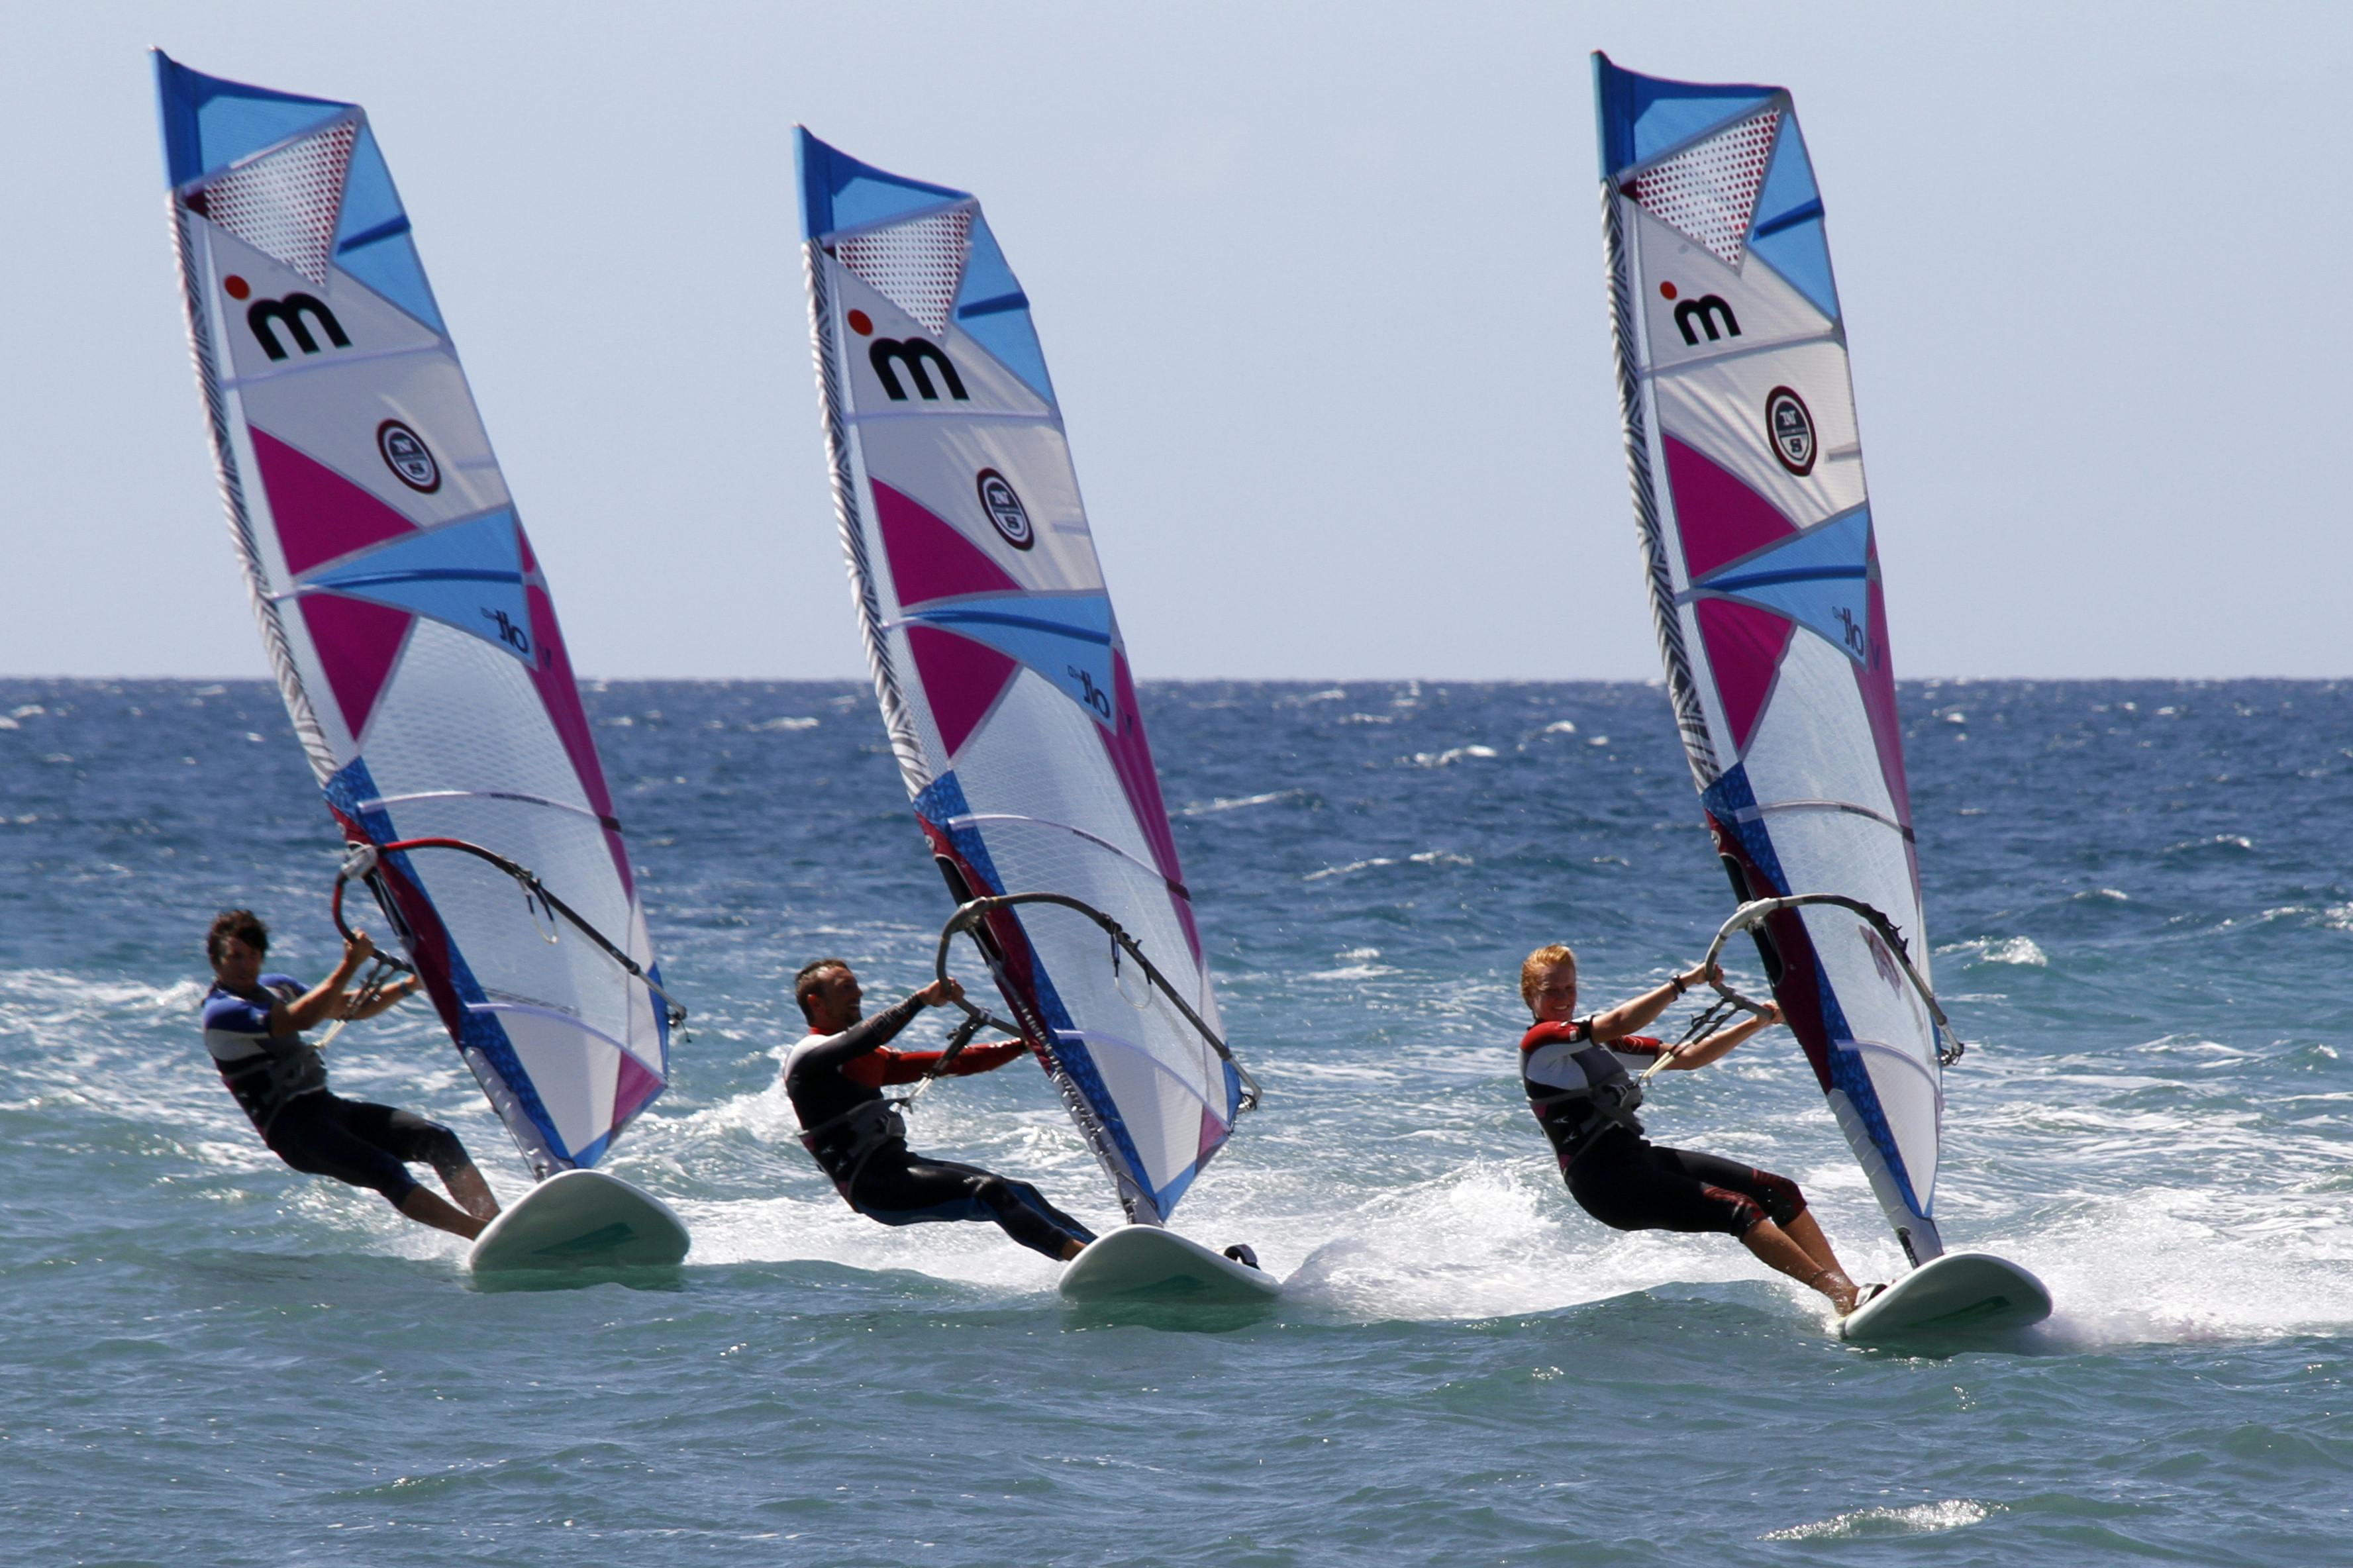 Windsurfing and Stand Up Paddle Boarding